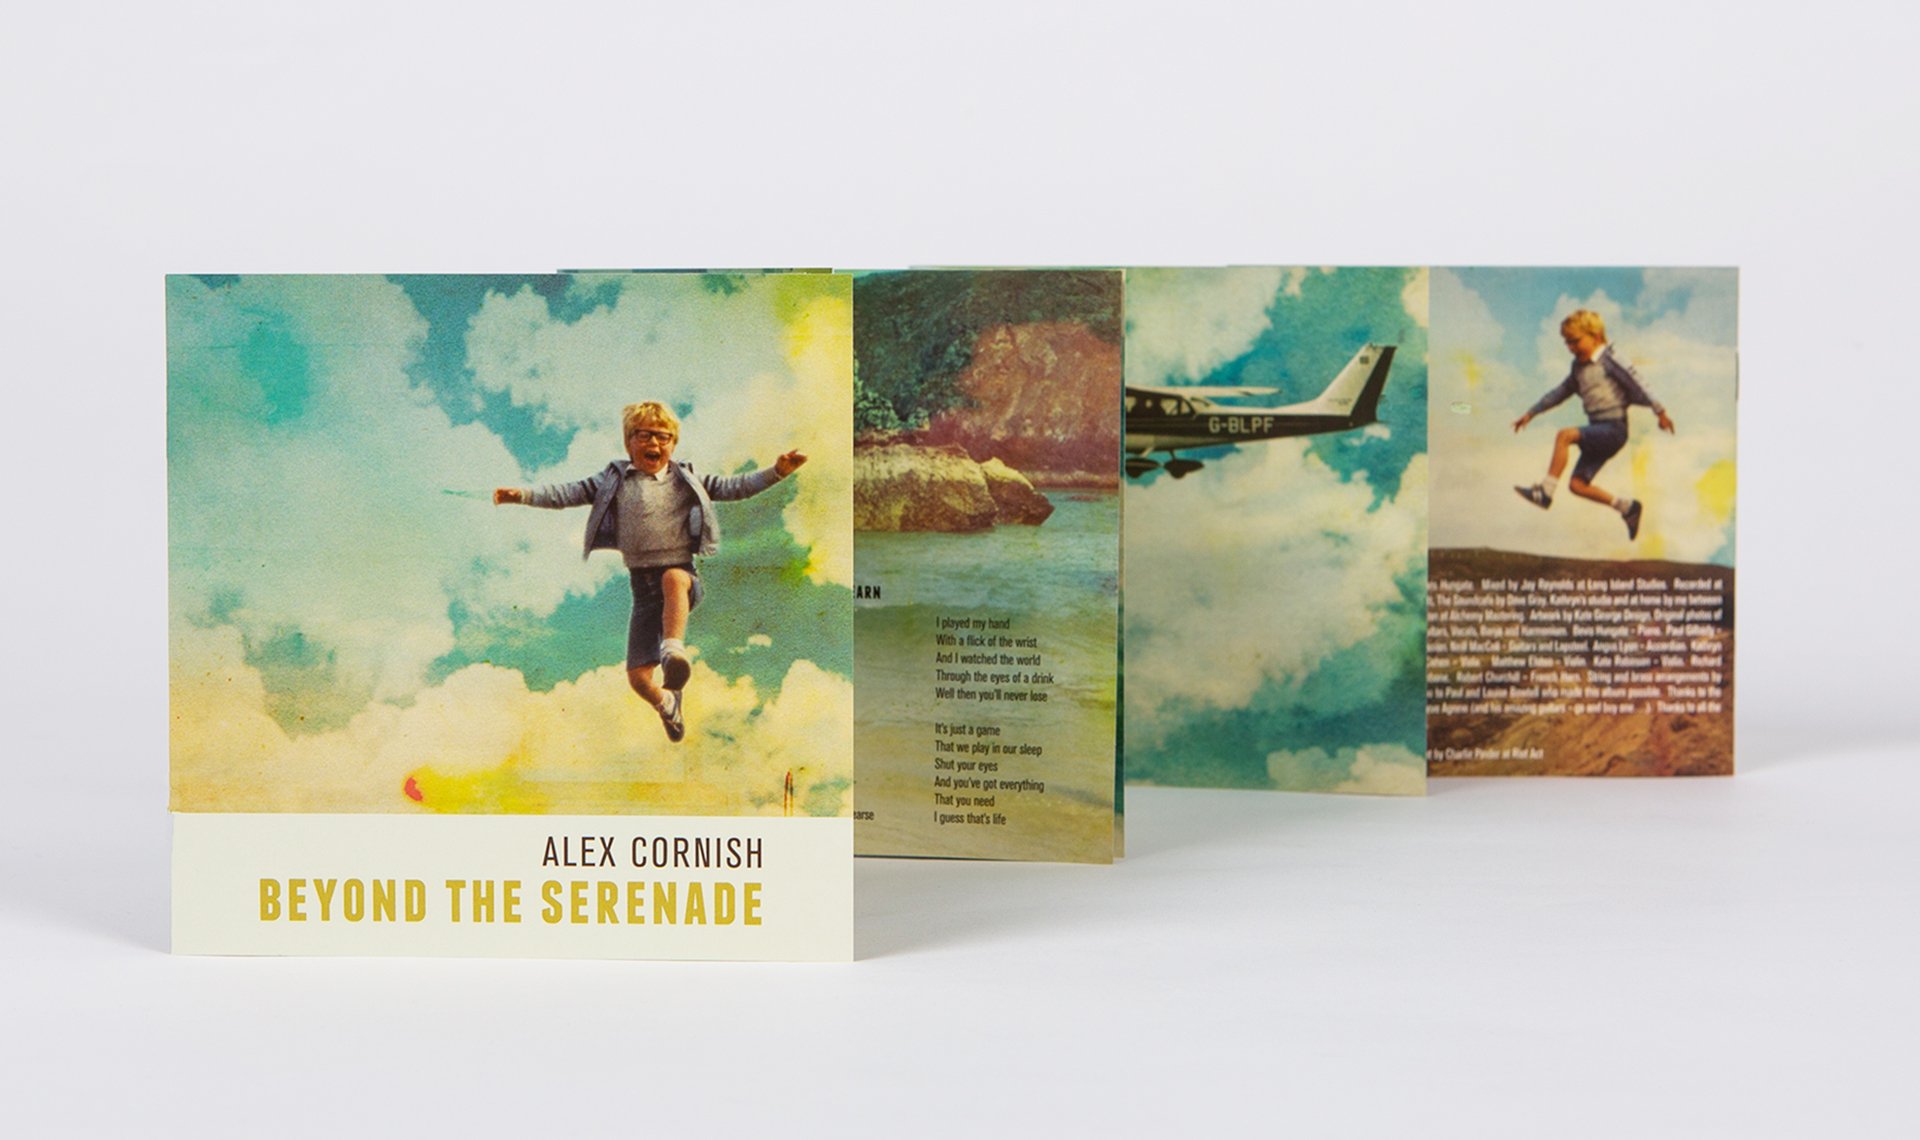 Alex Cornish CD Artwork depicts Alex as a young boy jumping into the air